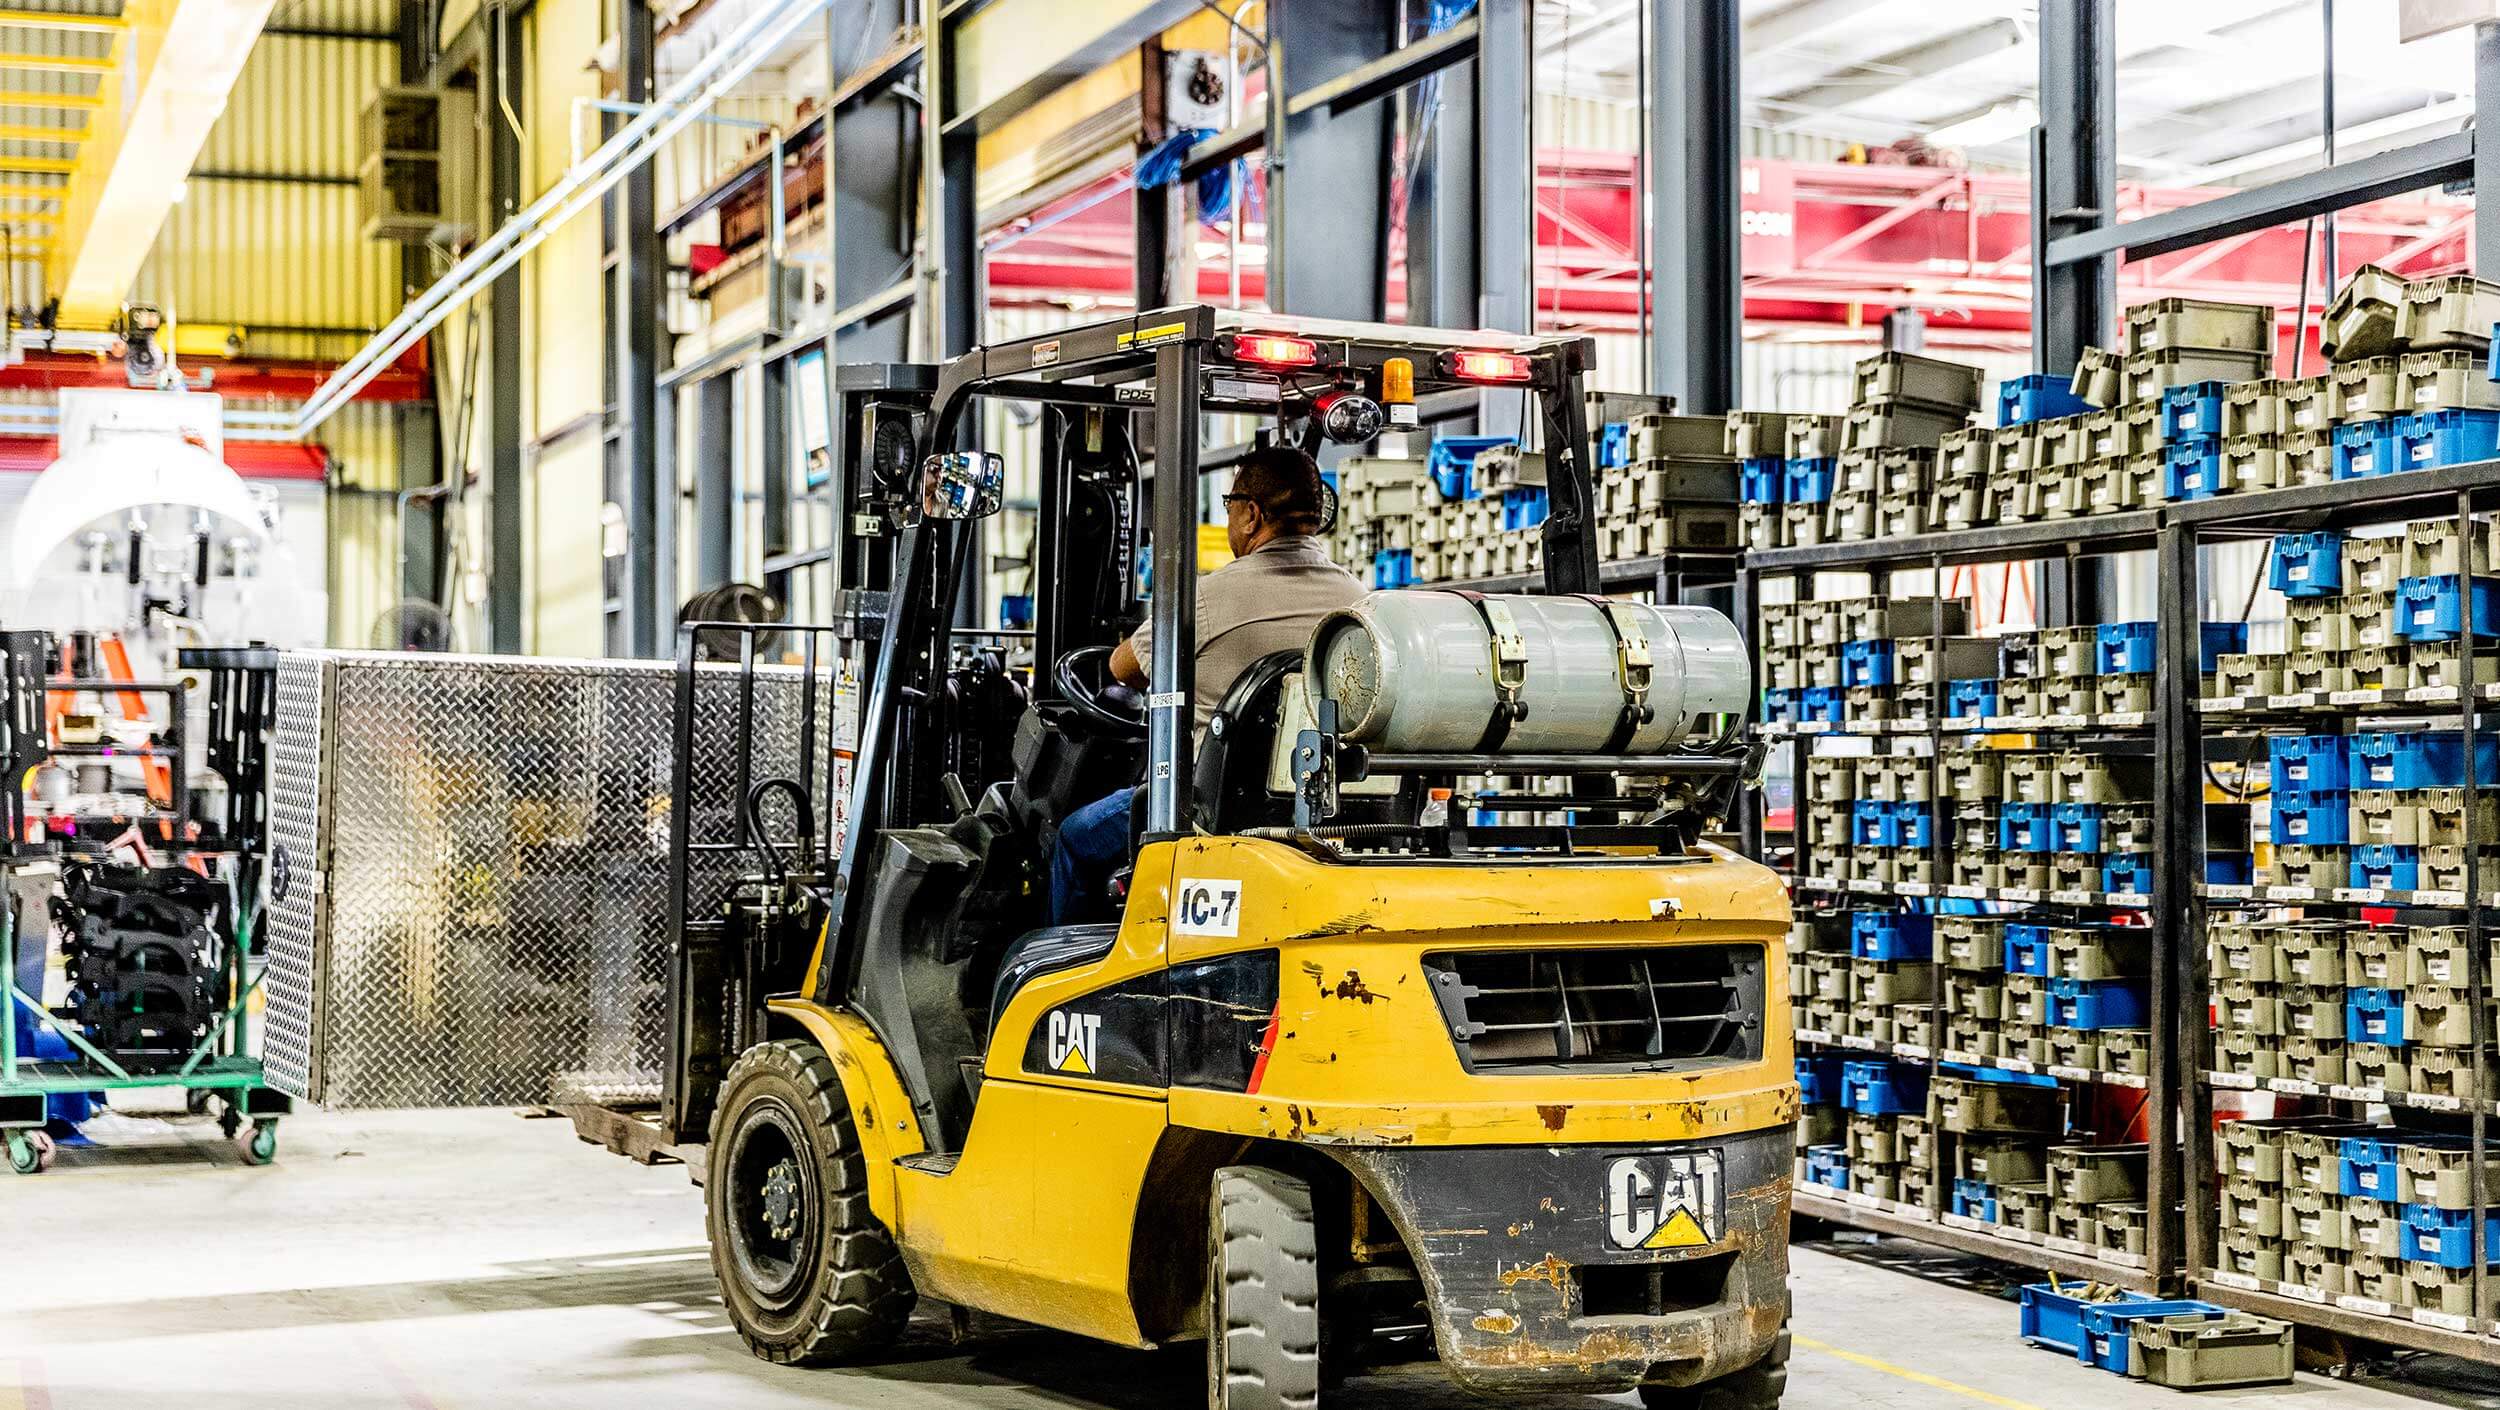 A person using a forklift